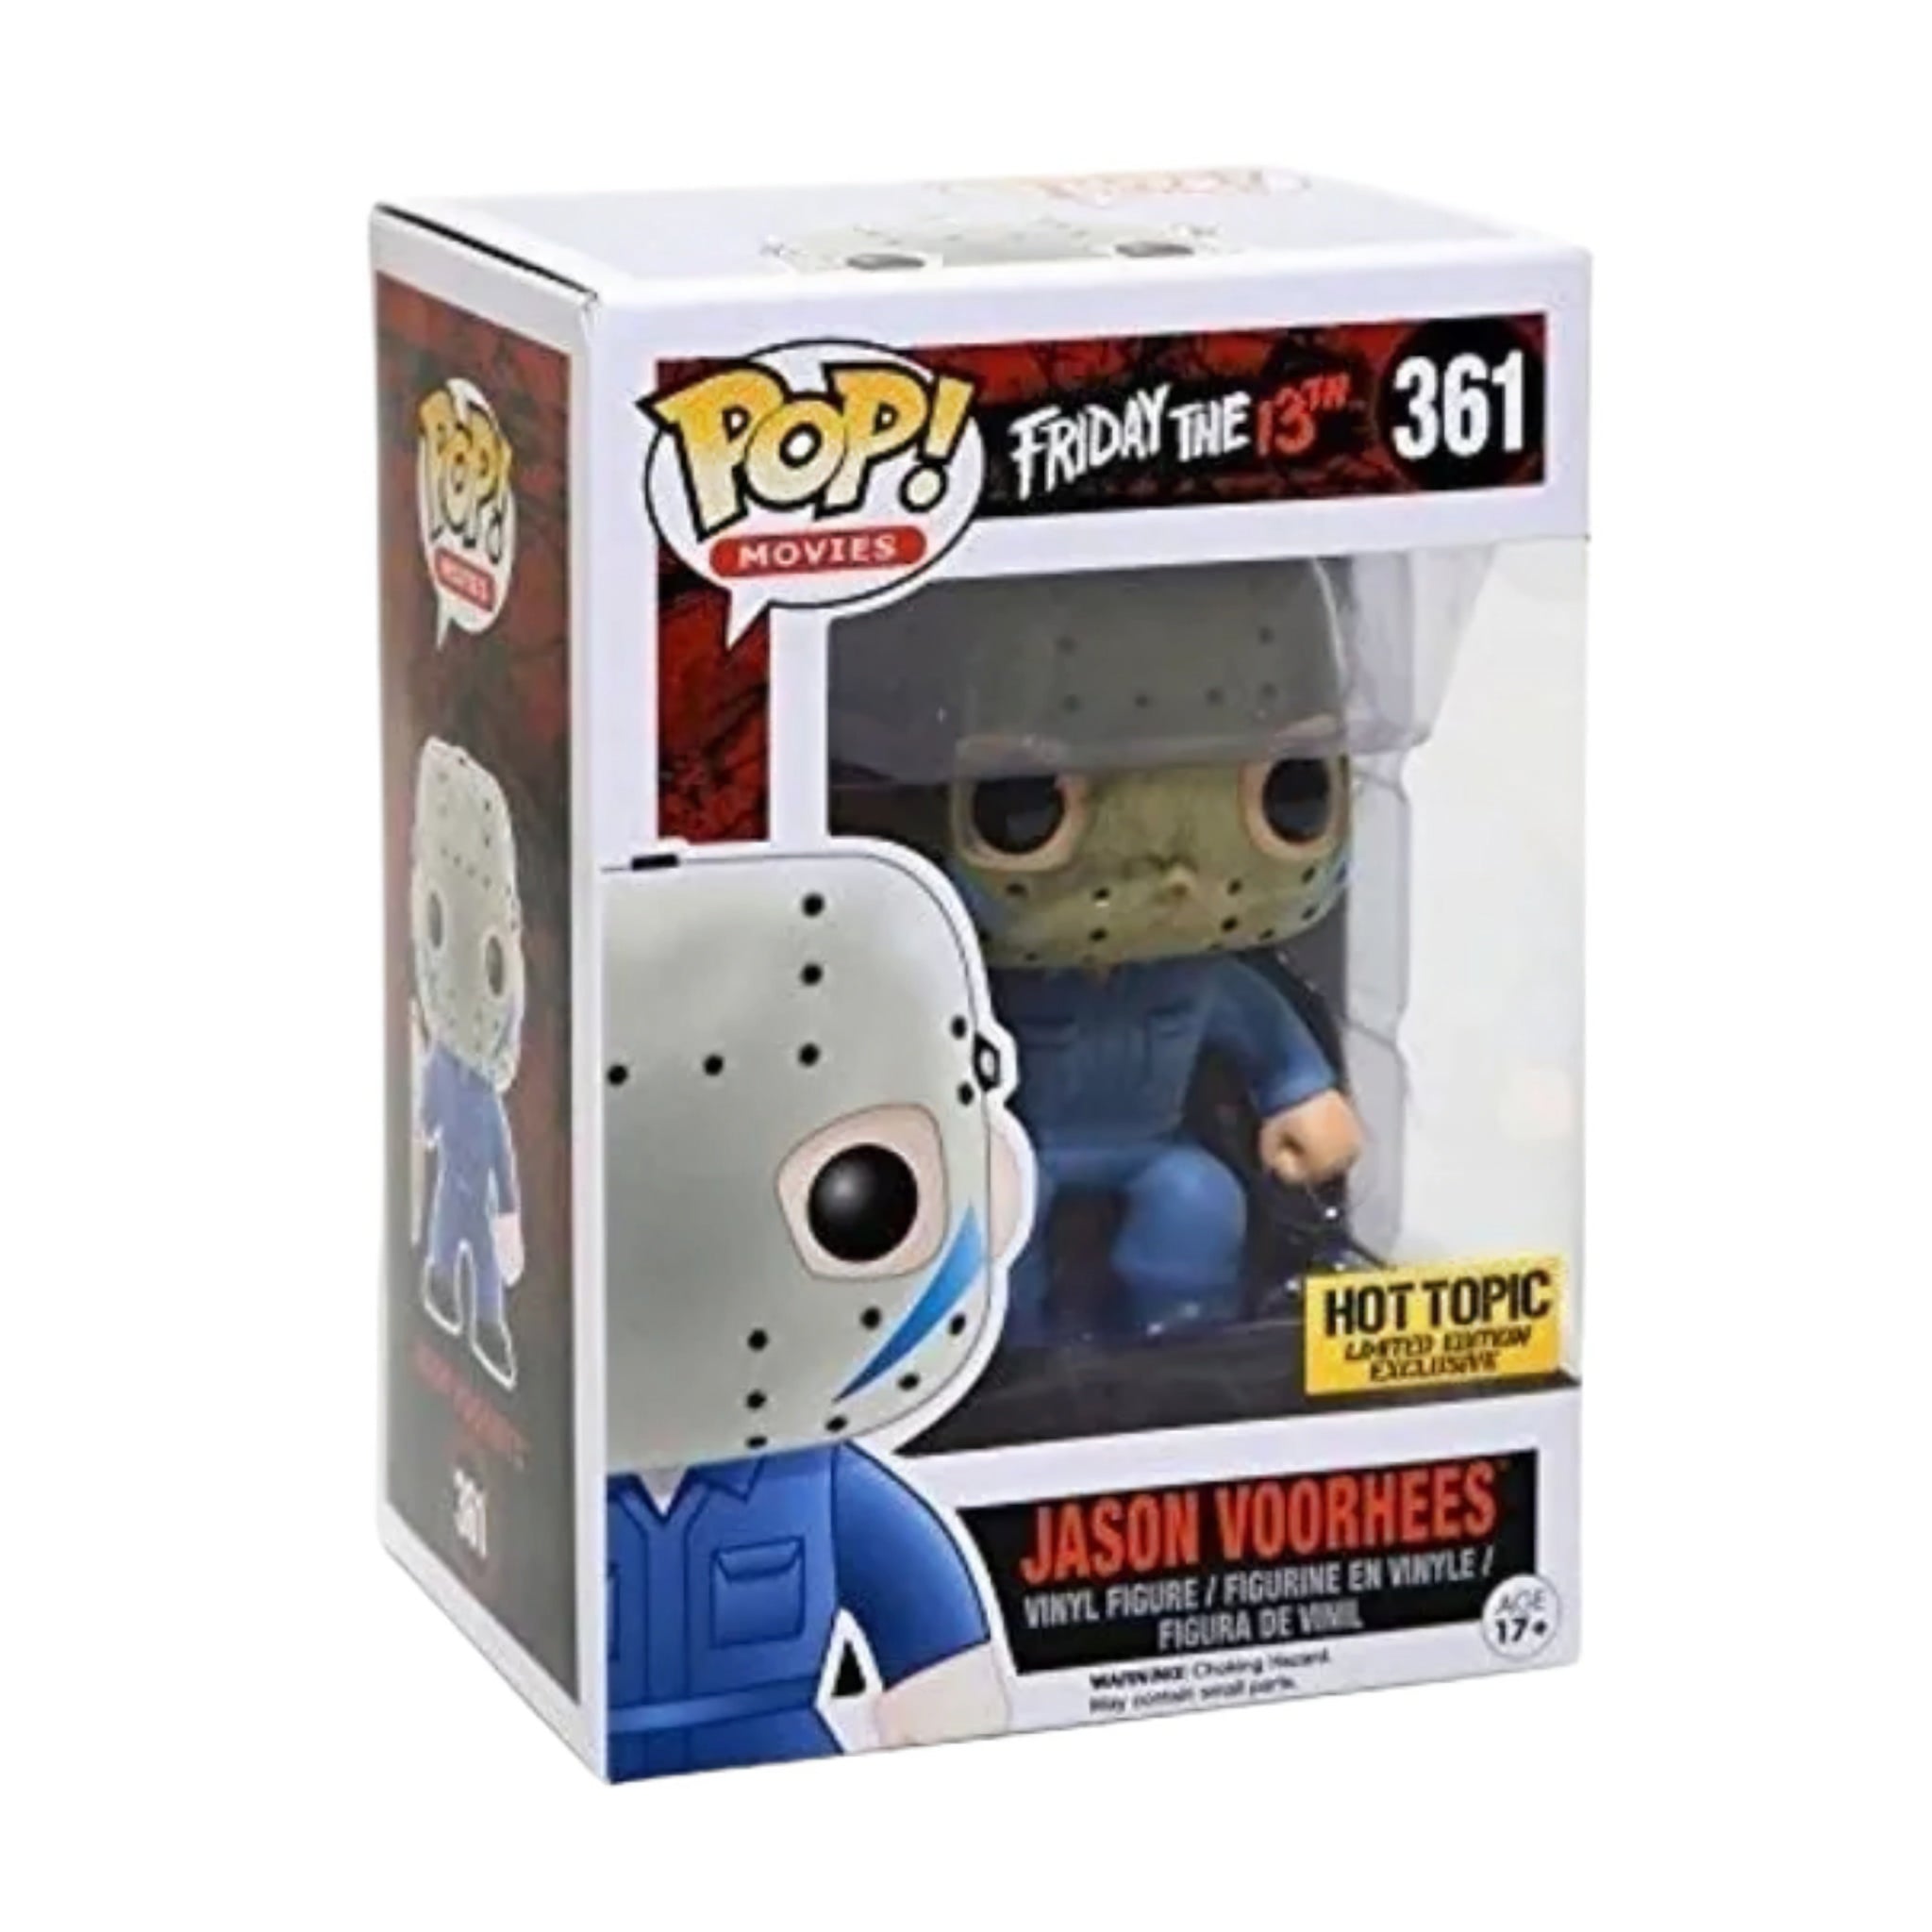 Jason Voorhees (Part V - Blue) Funko Pop! HOT TOPIC EXCLUSIVE